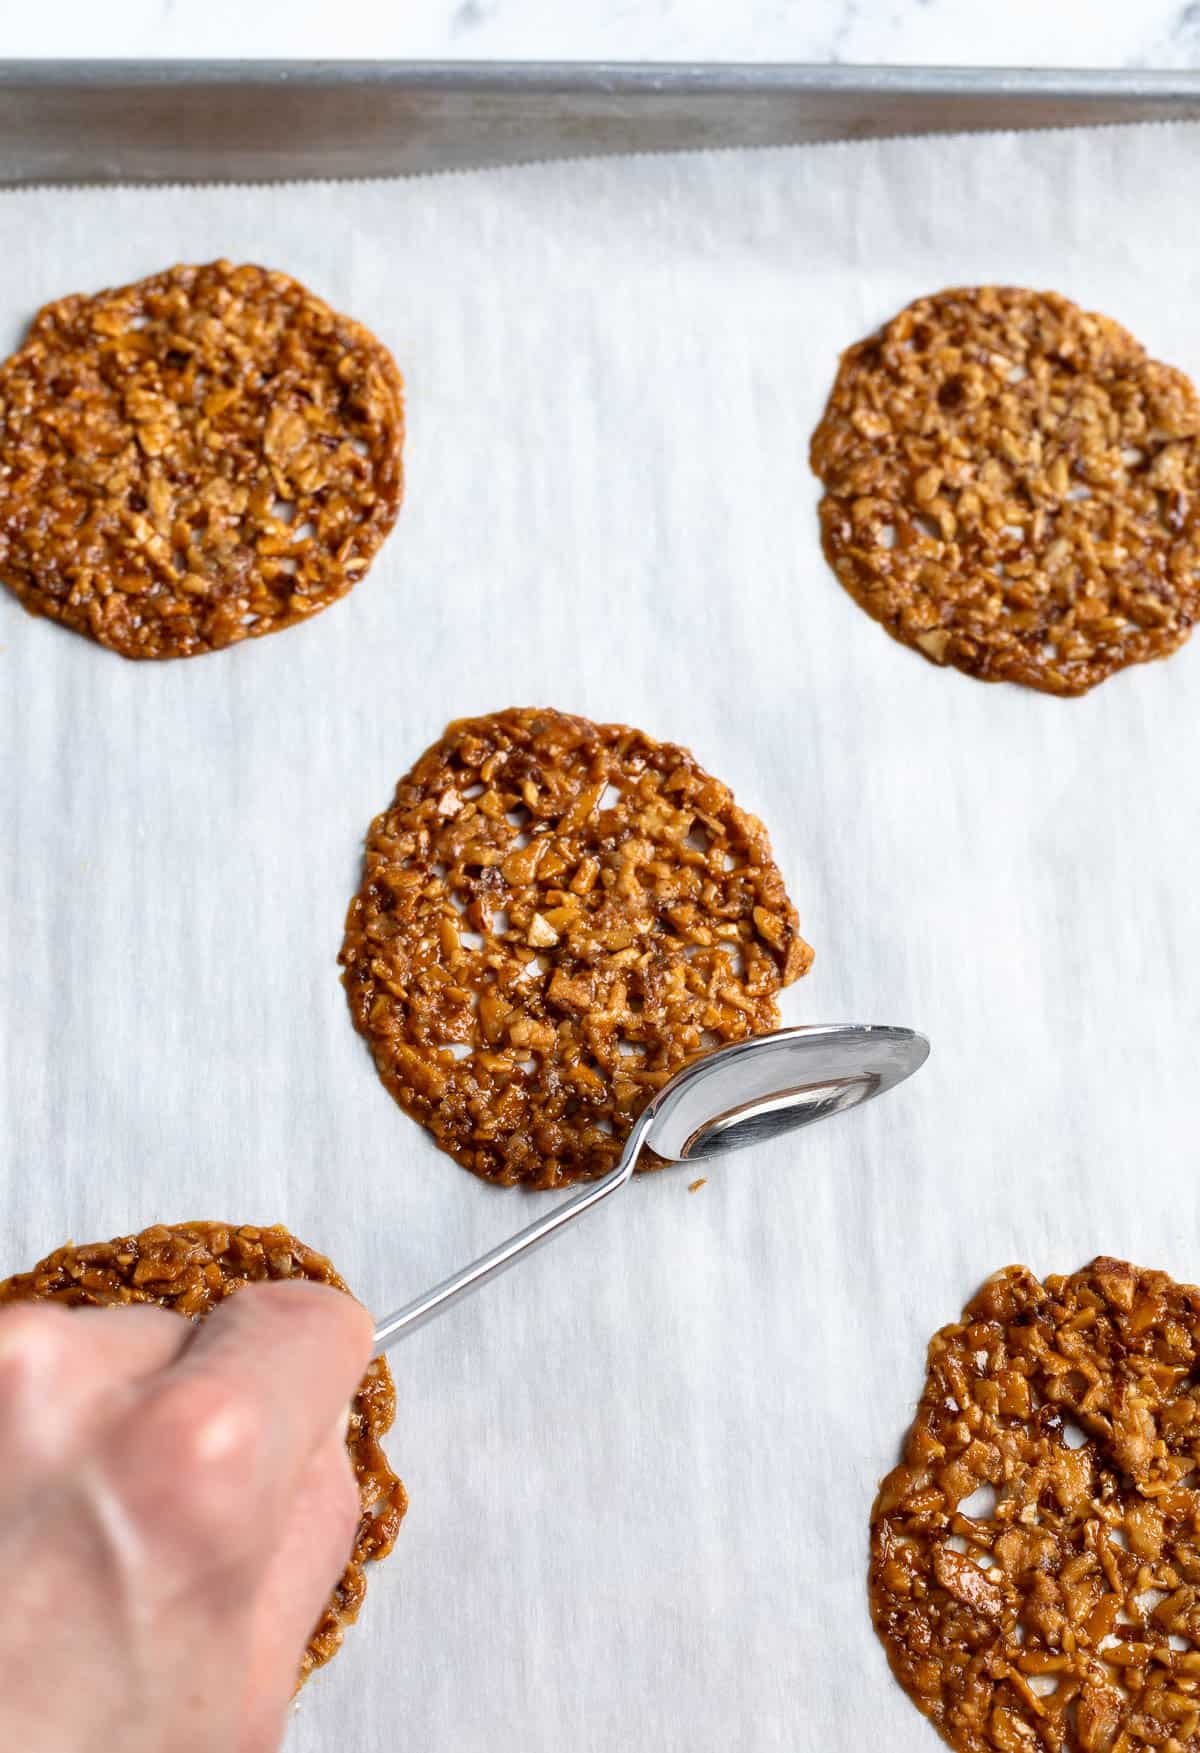 A spoon nudging a cookie into a rounder shape on the pan.